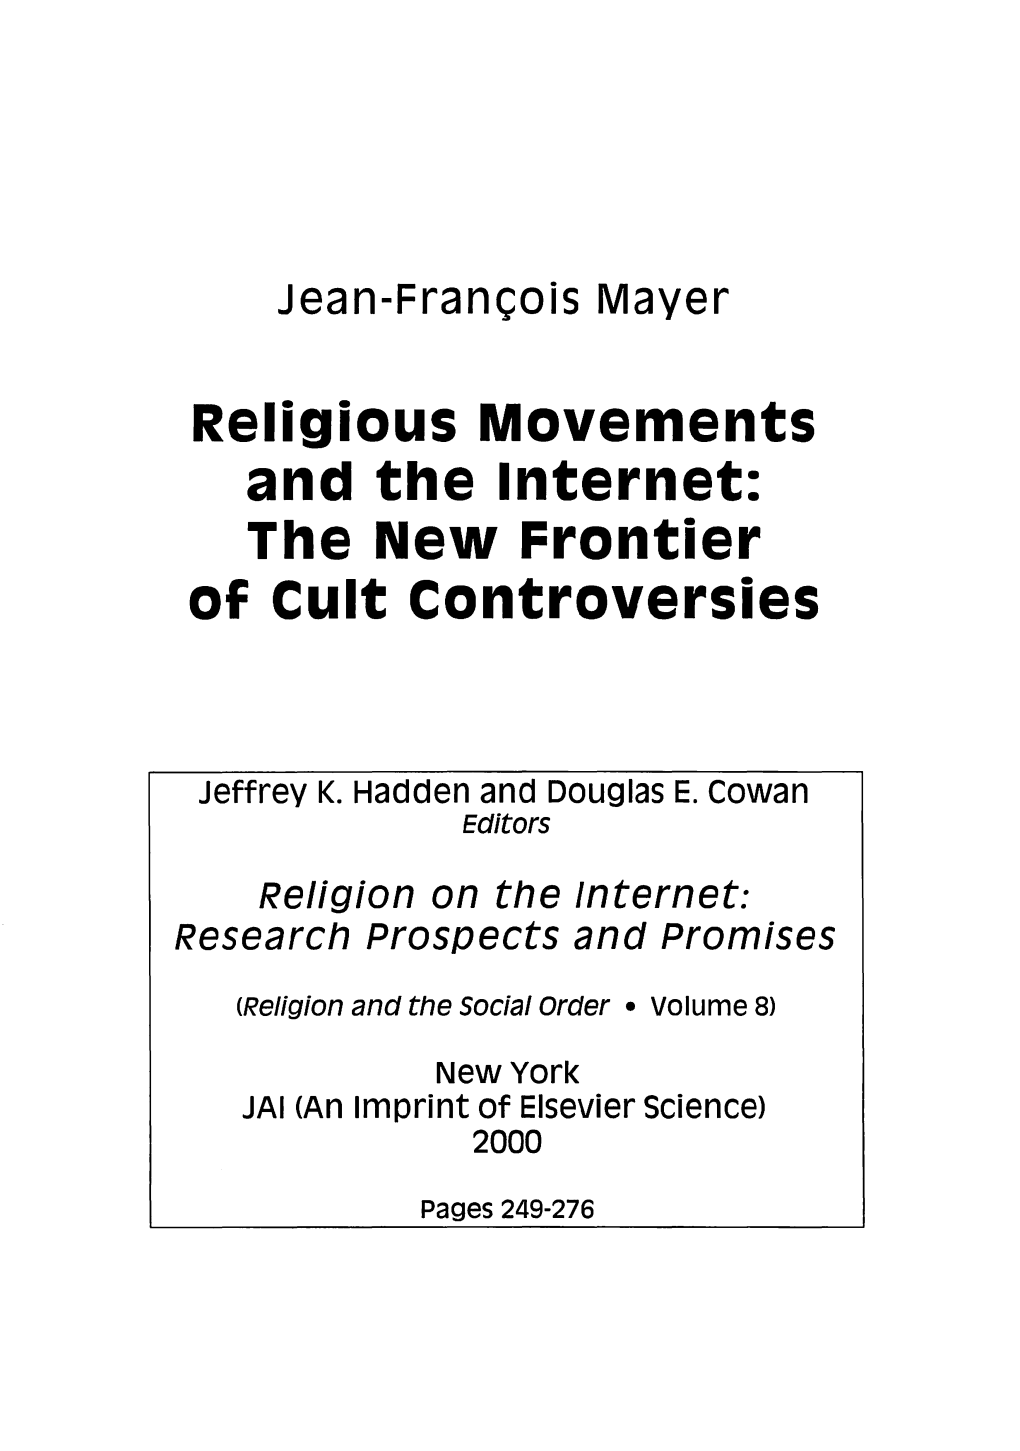 Religious Movements and the Internet: the New Frontier of Cult Controversies